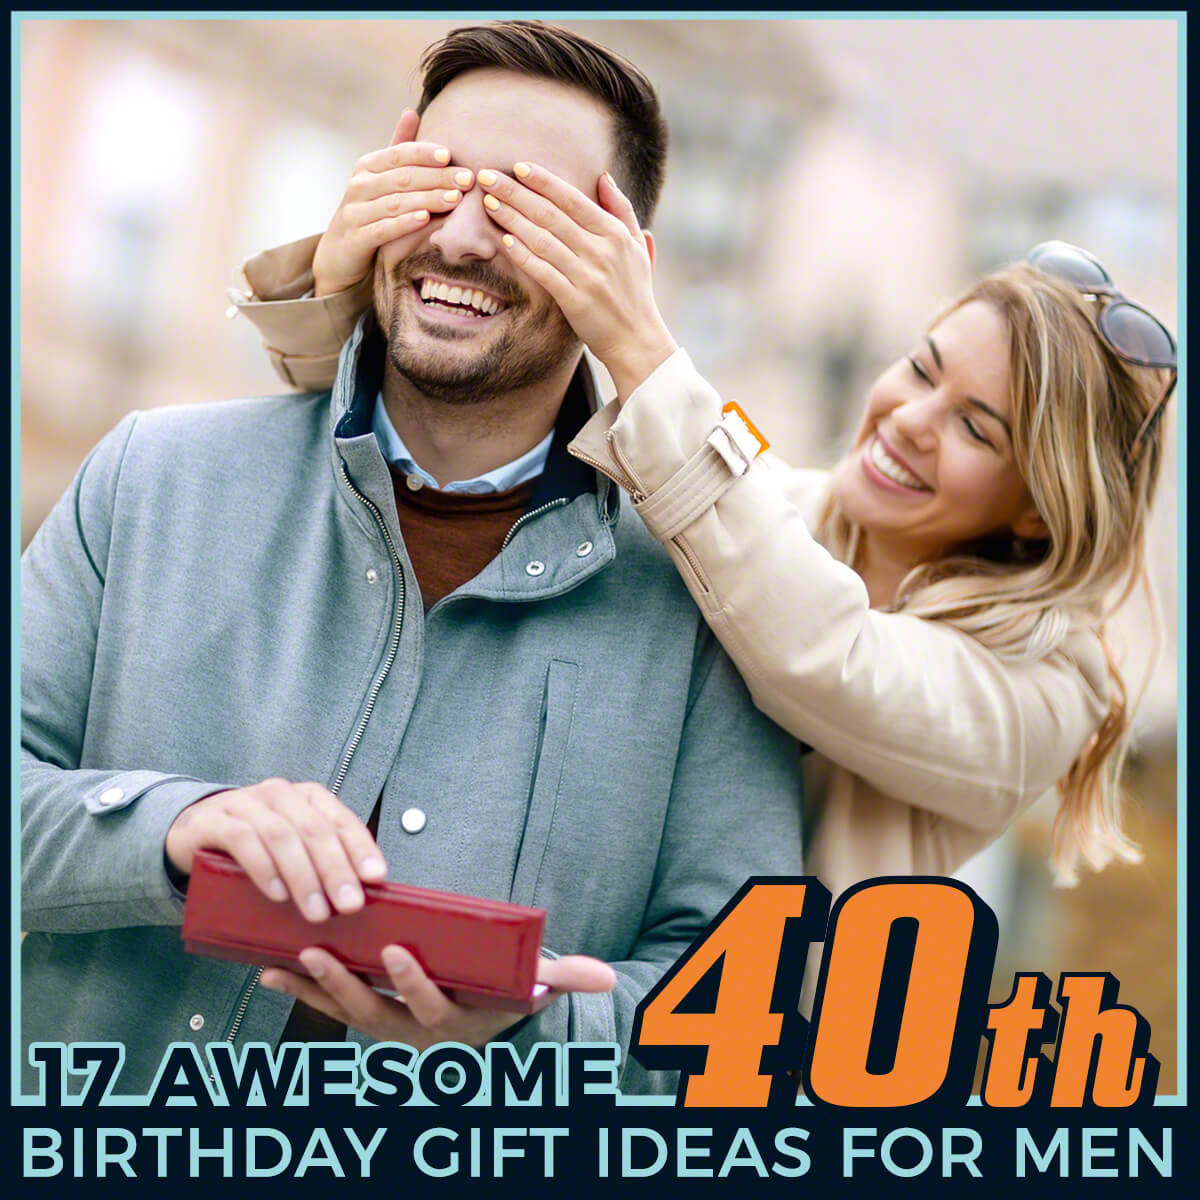 40th Birthday Gift Ideas For Men
 17 Awesome 40th Birthday Gift Ideas for Men